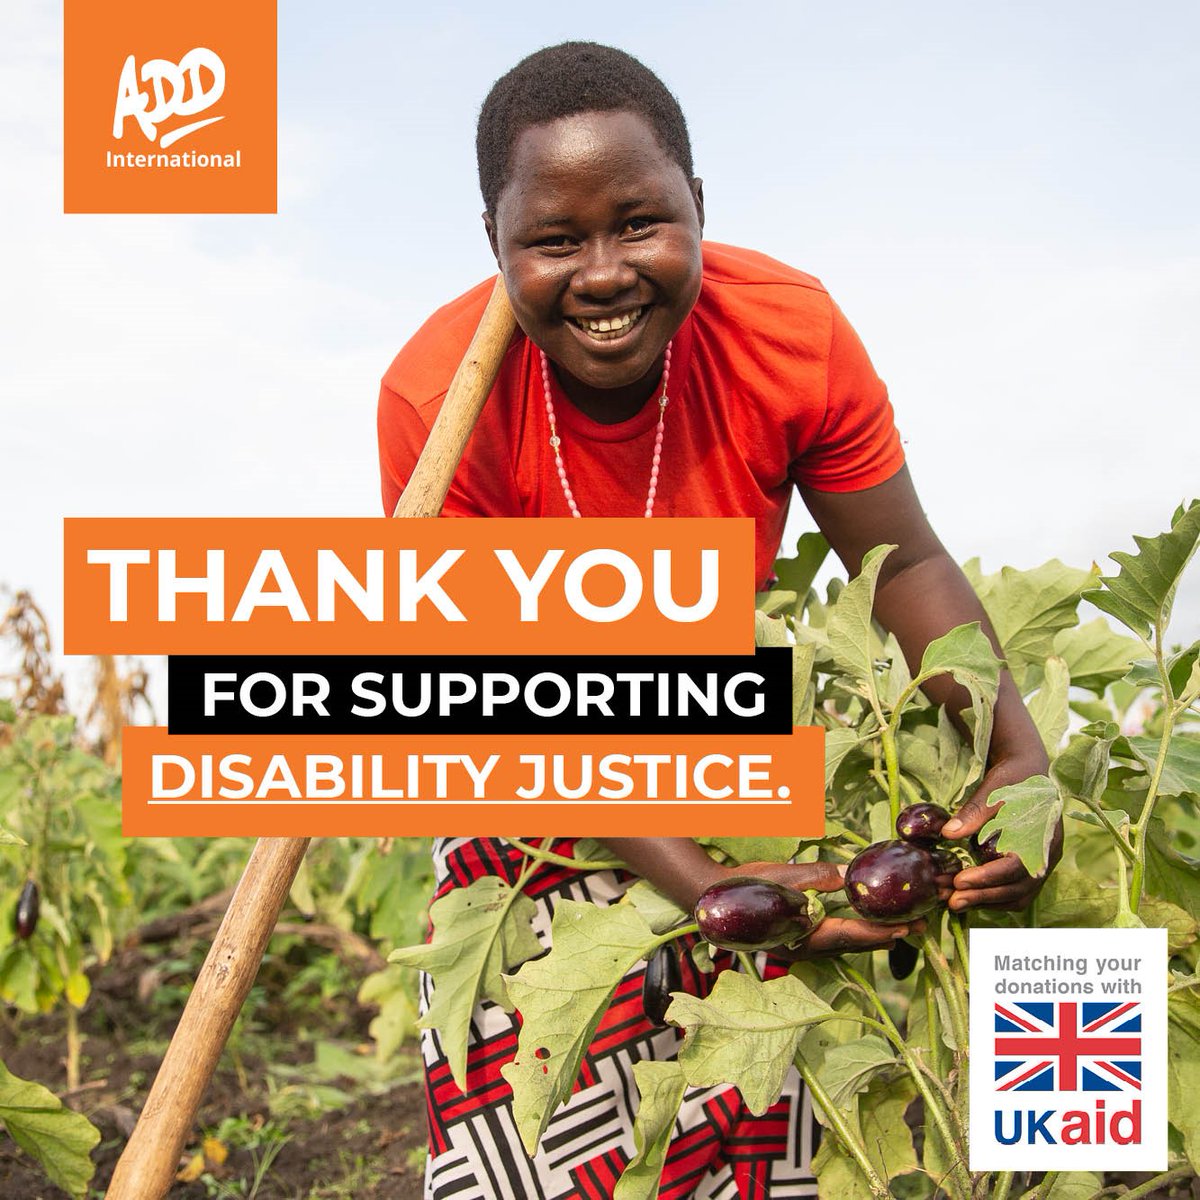 Thank you to everyone who supported our 100% #Homegrown appeal last year! We raised £156,124.54 which includes £71,577.27 of match funding from the UK government and @FCDOGovUK #Uganda #kitchengardens #UKAidMatch #DisabilityJustice #DisabilityRights